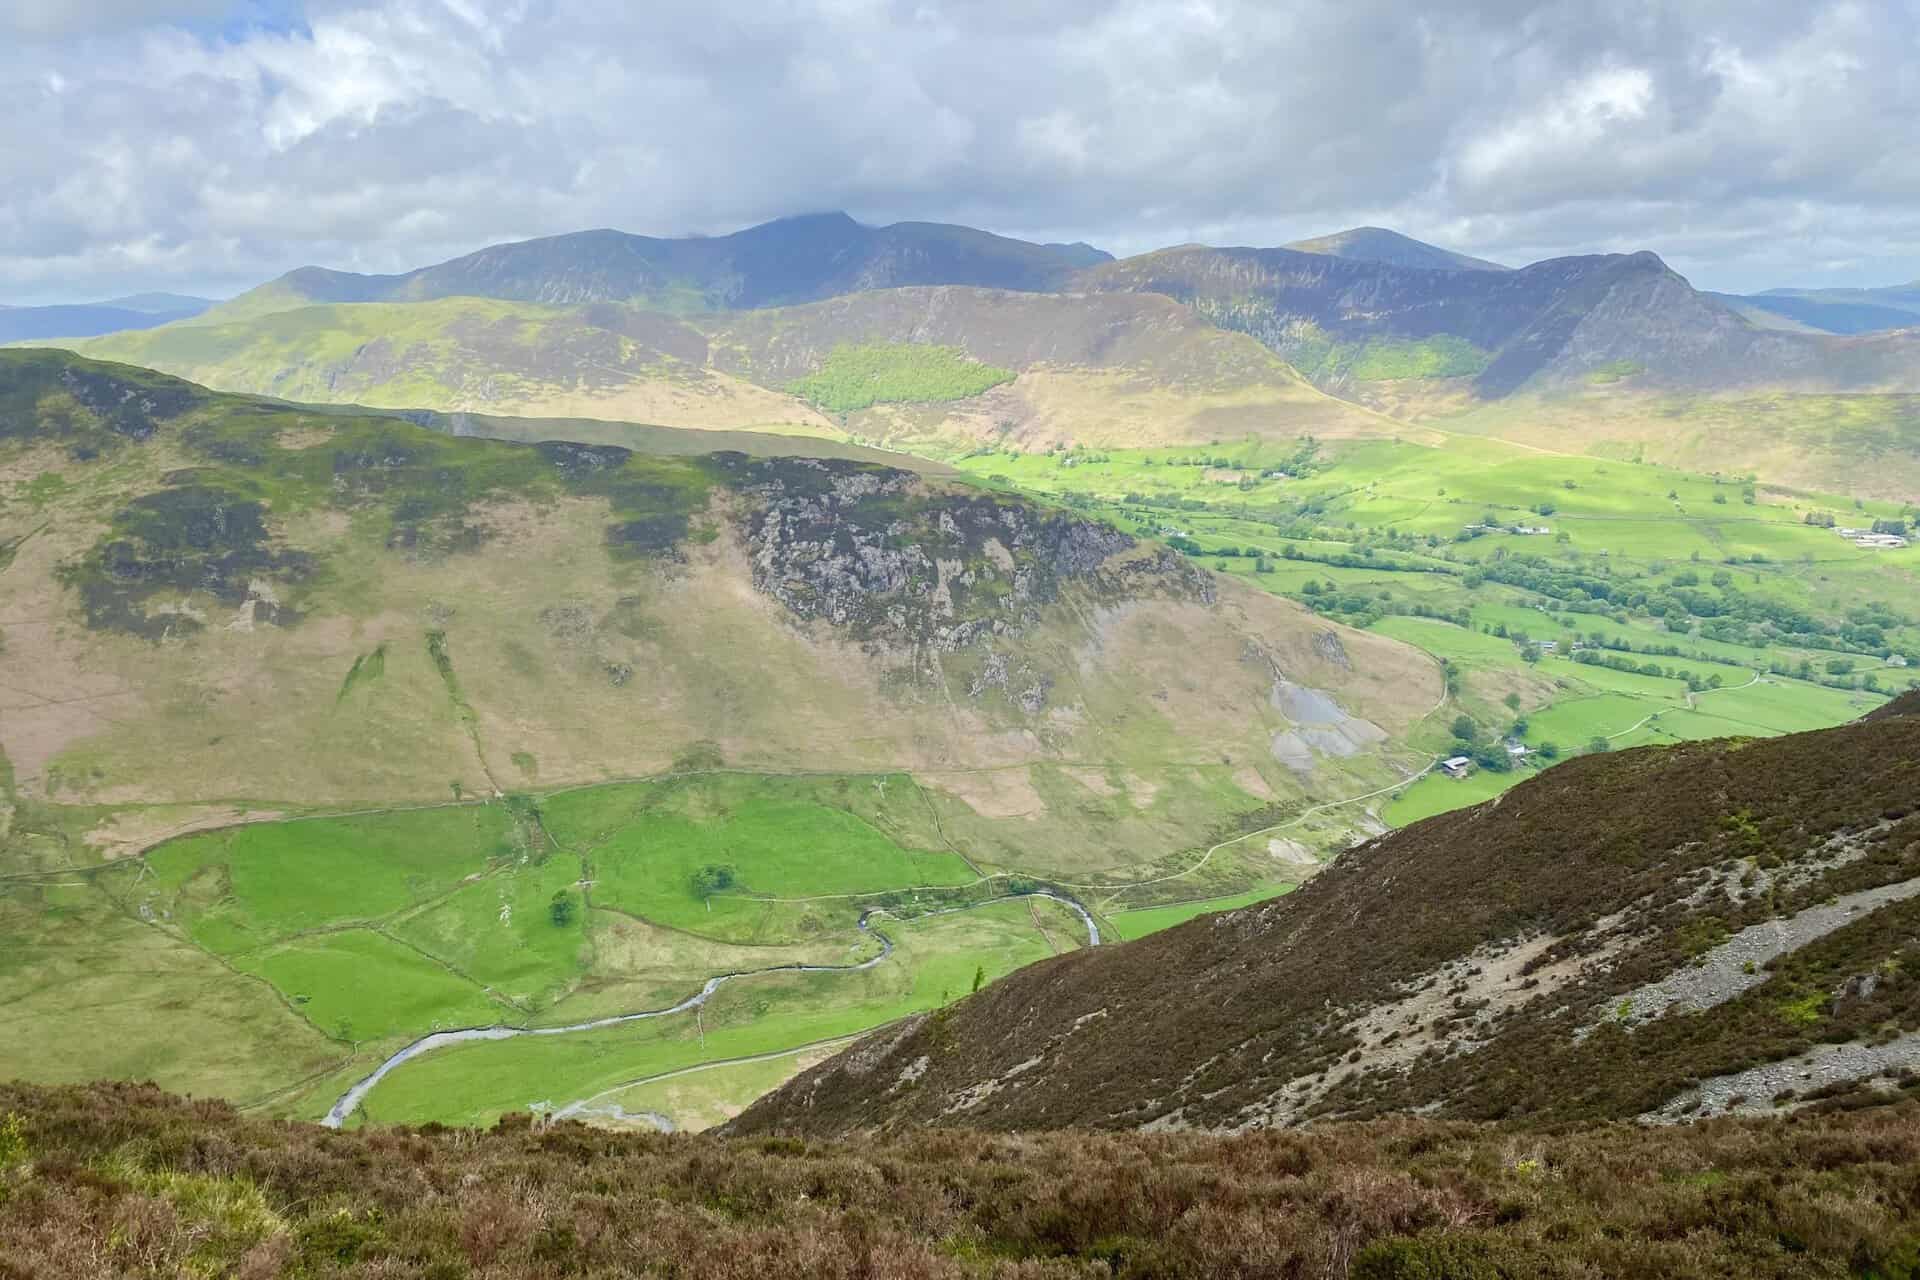 The Newlands valley and many of the Lake District north-western fells, including Whiteless Pike, Wandope, Crag Hill, Sail, Causey Pike, Ard Crags and Knott Rigg.